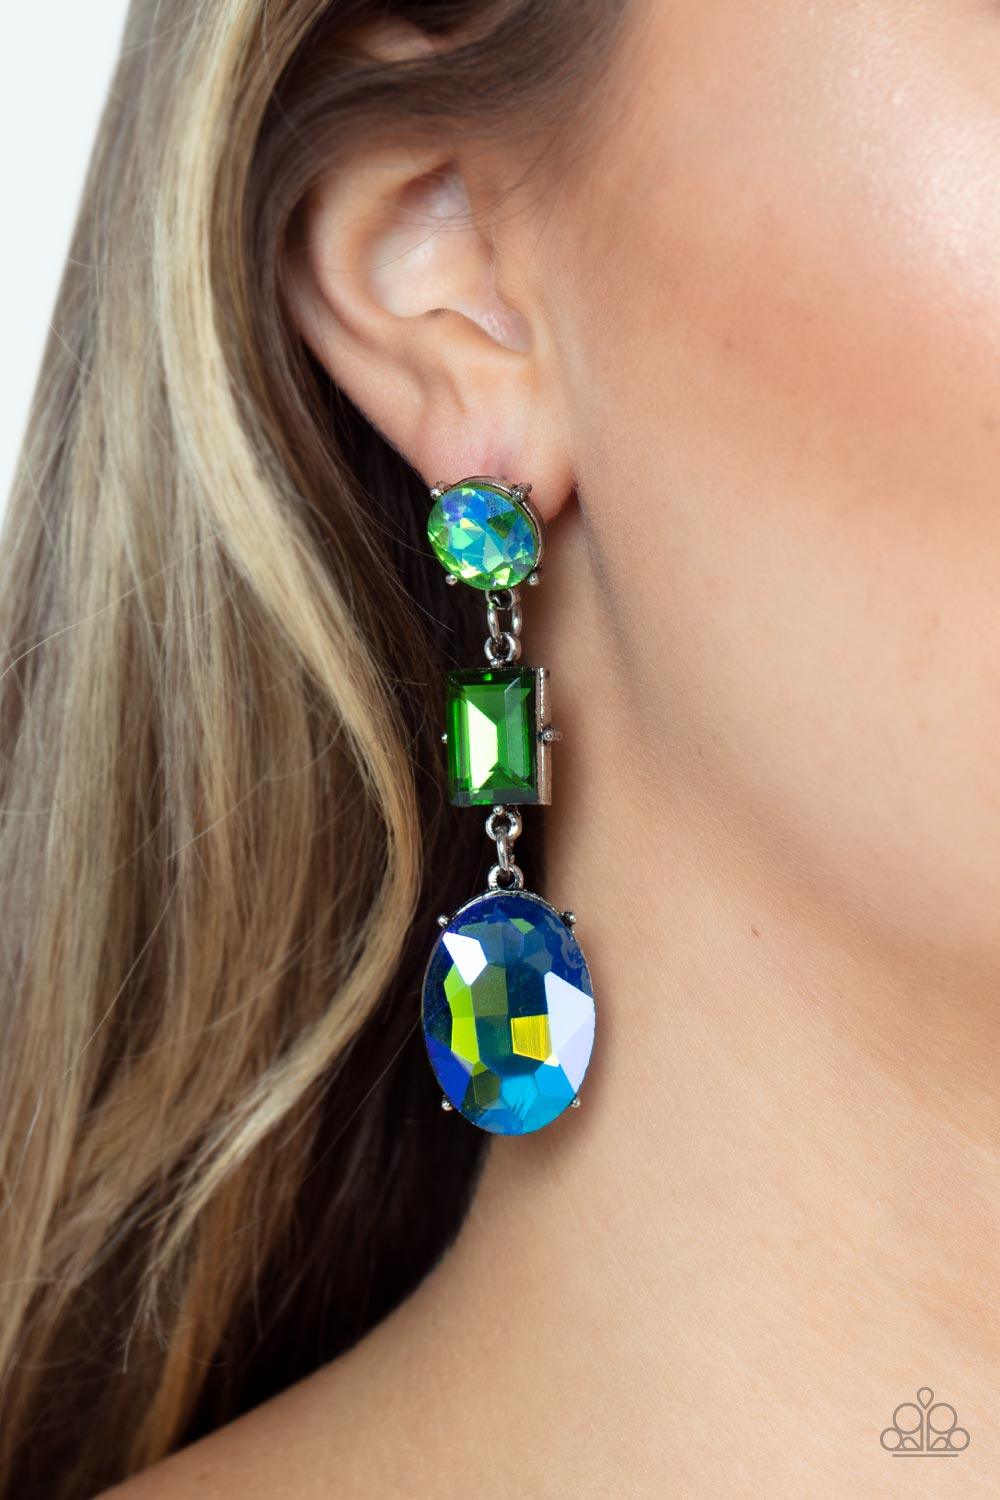 Paparazzi Accessories Extra Envious - Green Featuring flashy UV finishes, a classic round green, emerald cut green, and blue oval gem glamorously link into a jaw-dropping lure. Earring attaches to a standard post fitting. Sold as one pair of post earrings